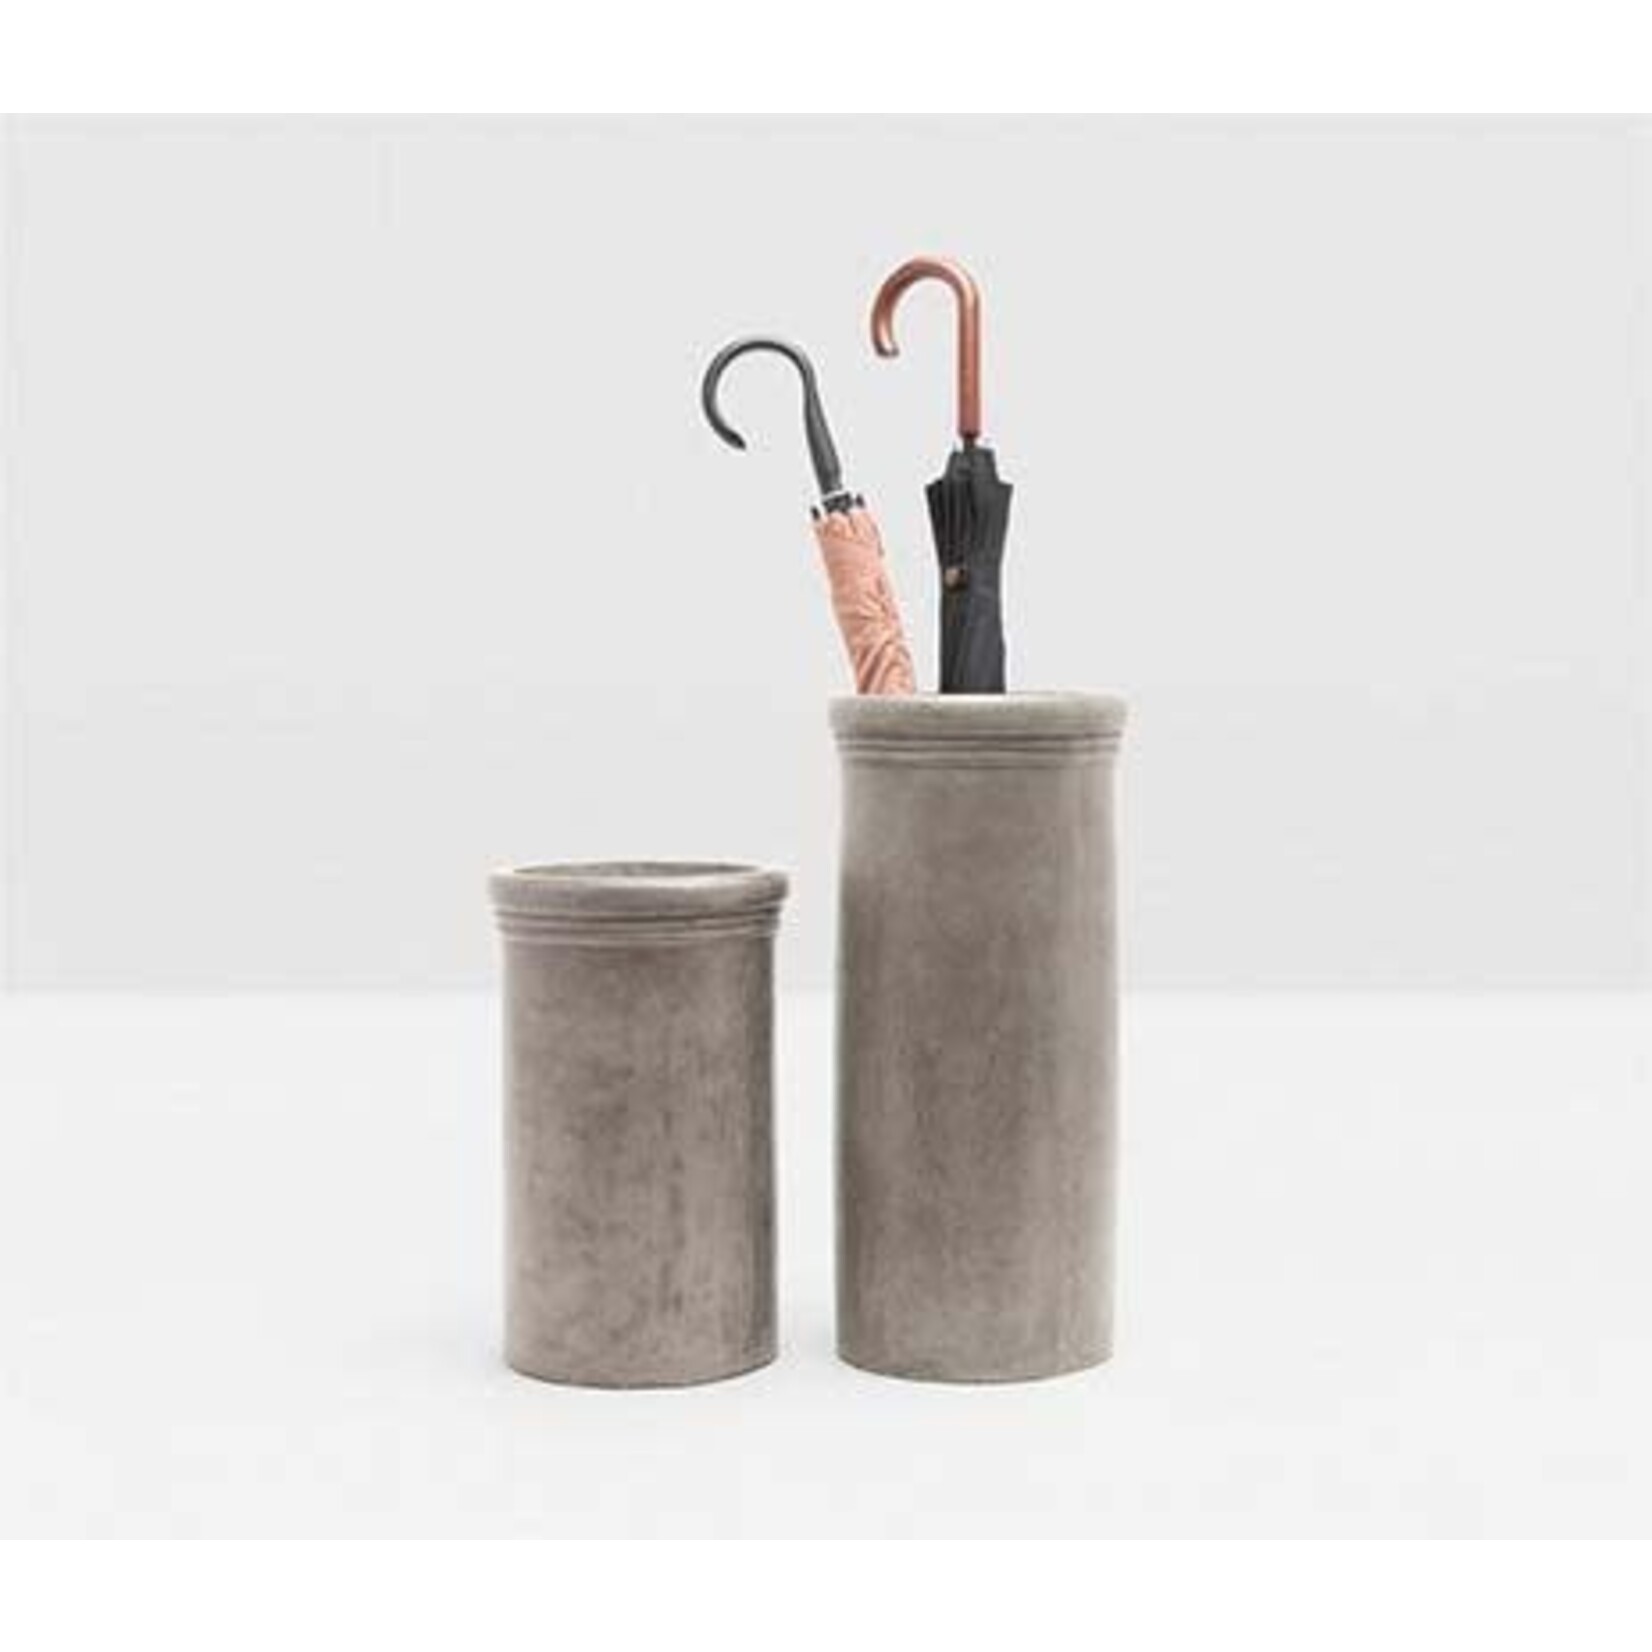 Pigeon and Poodle Elrick Gray Umbrella Stand